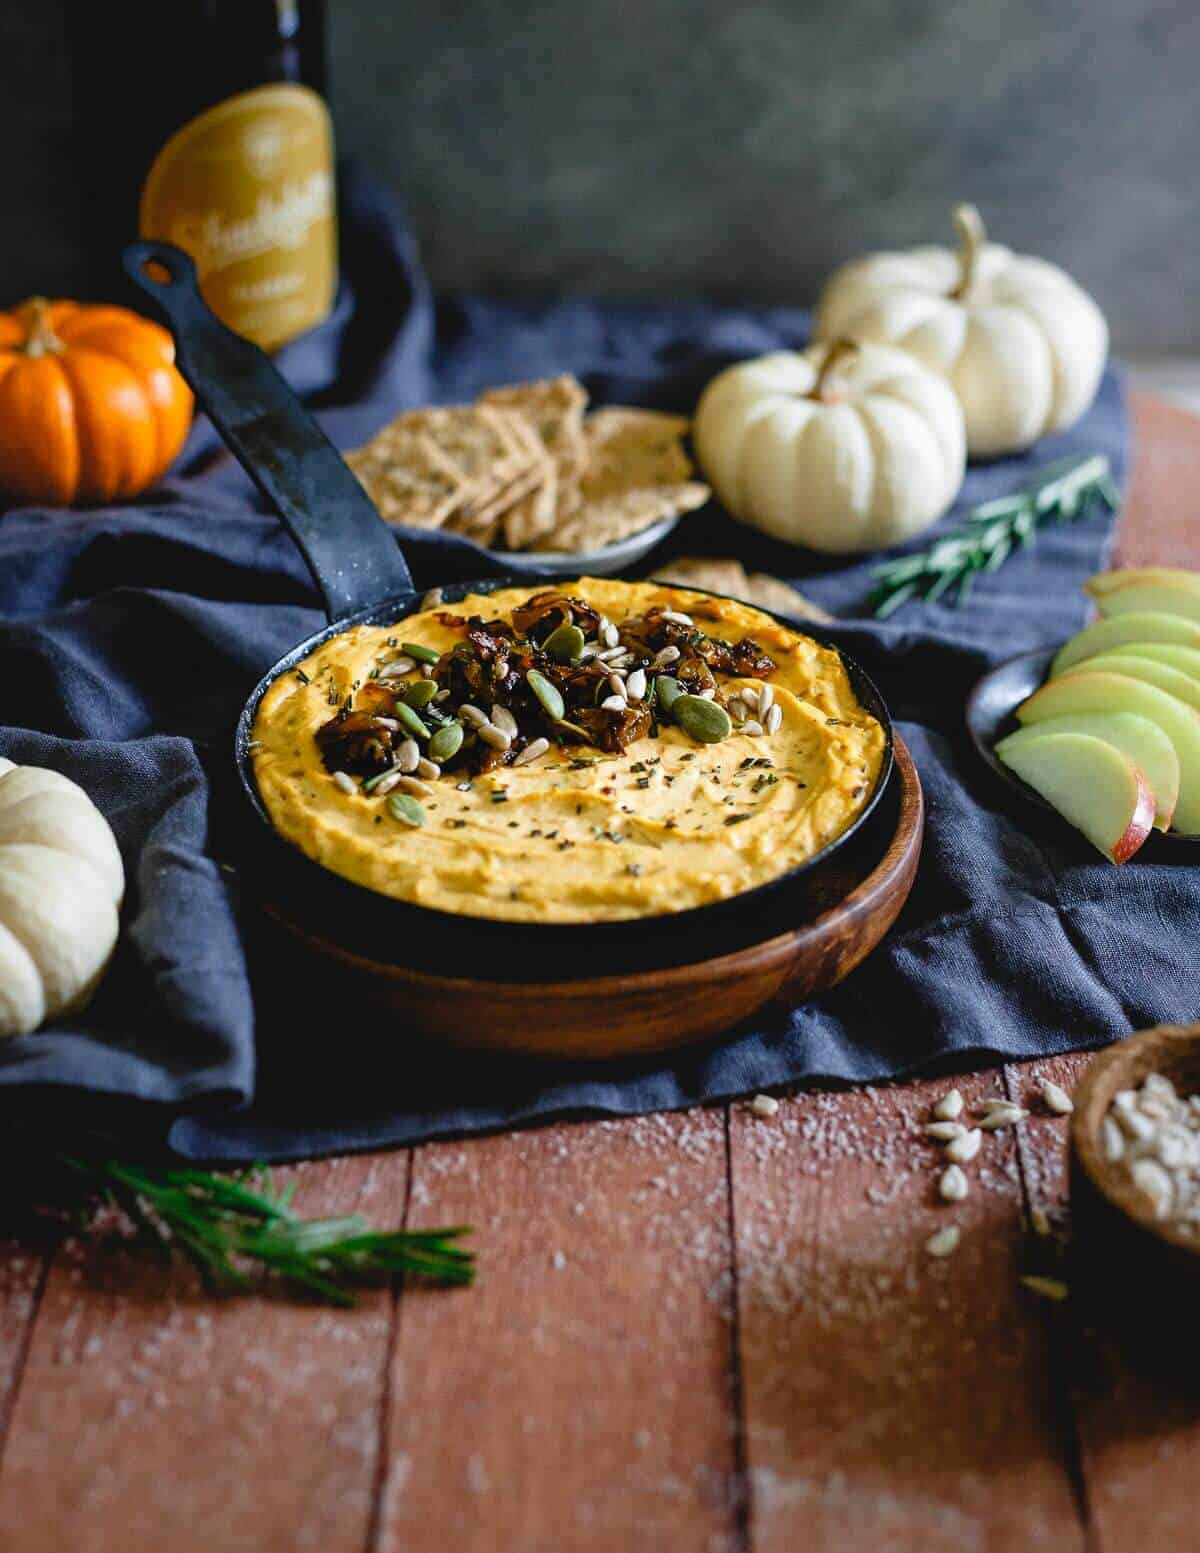 Pumpkin goat cheese dip with caramelized onions can be served warmed or cold, it's a great addition to your party spread and perfect for the holidays. Try it with crackers, sliced fall/winter fruits or vegetables!